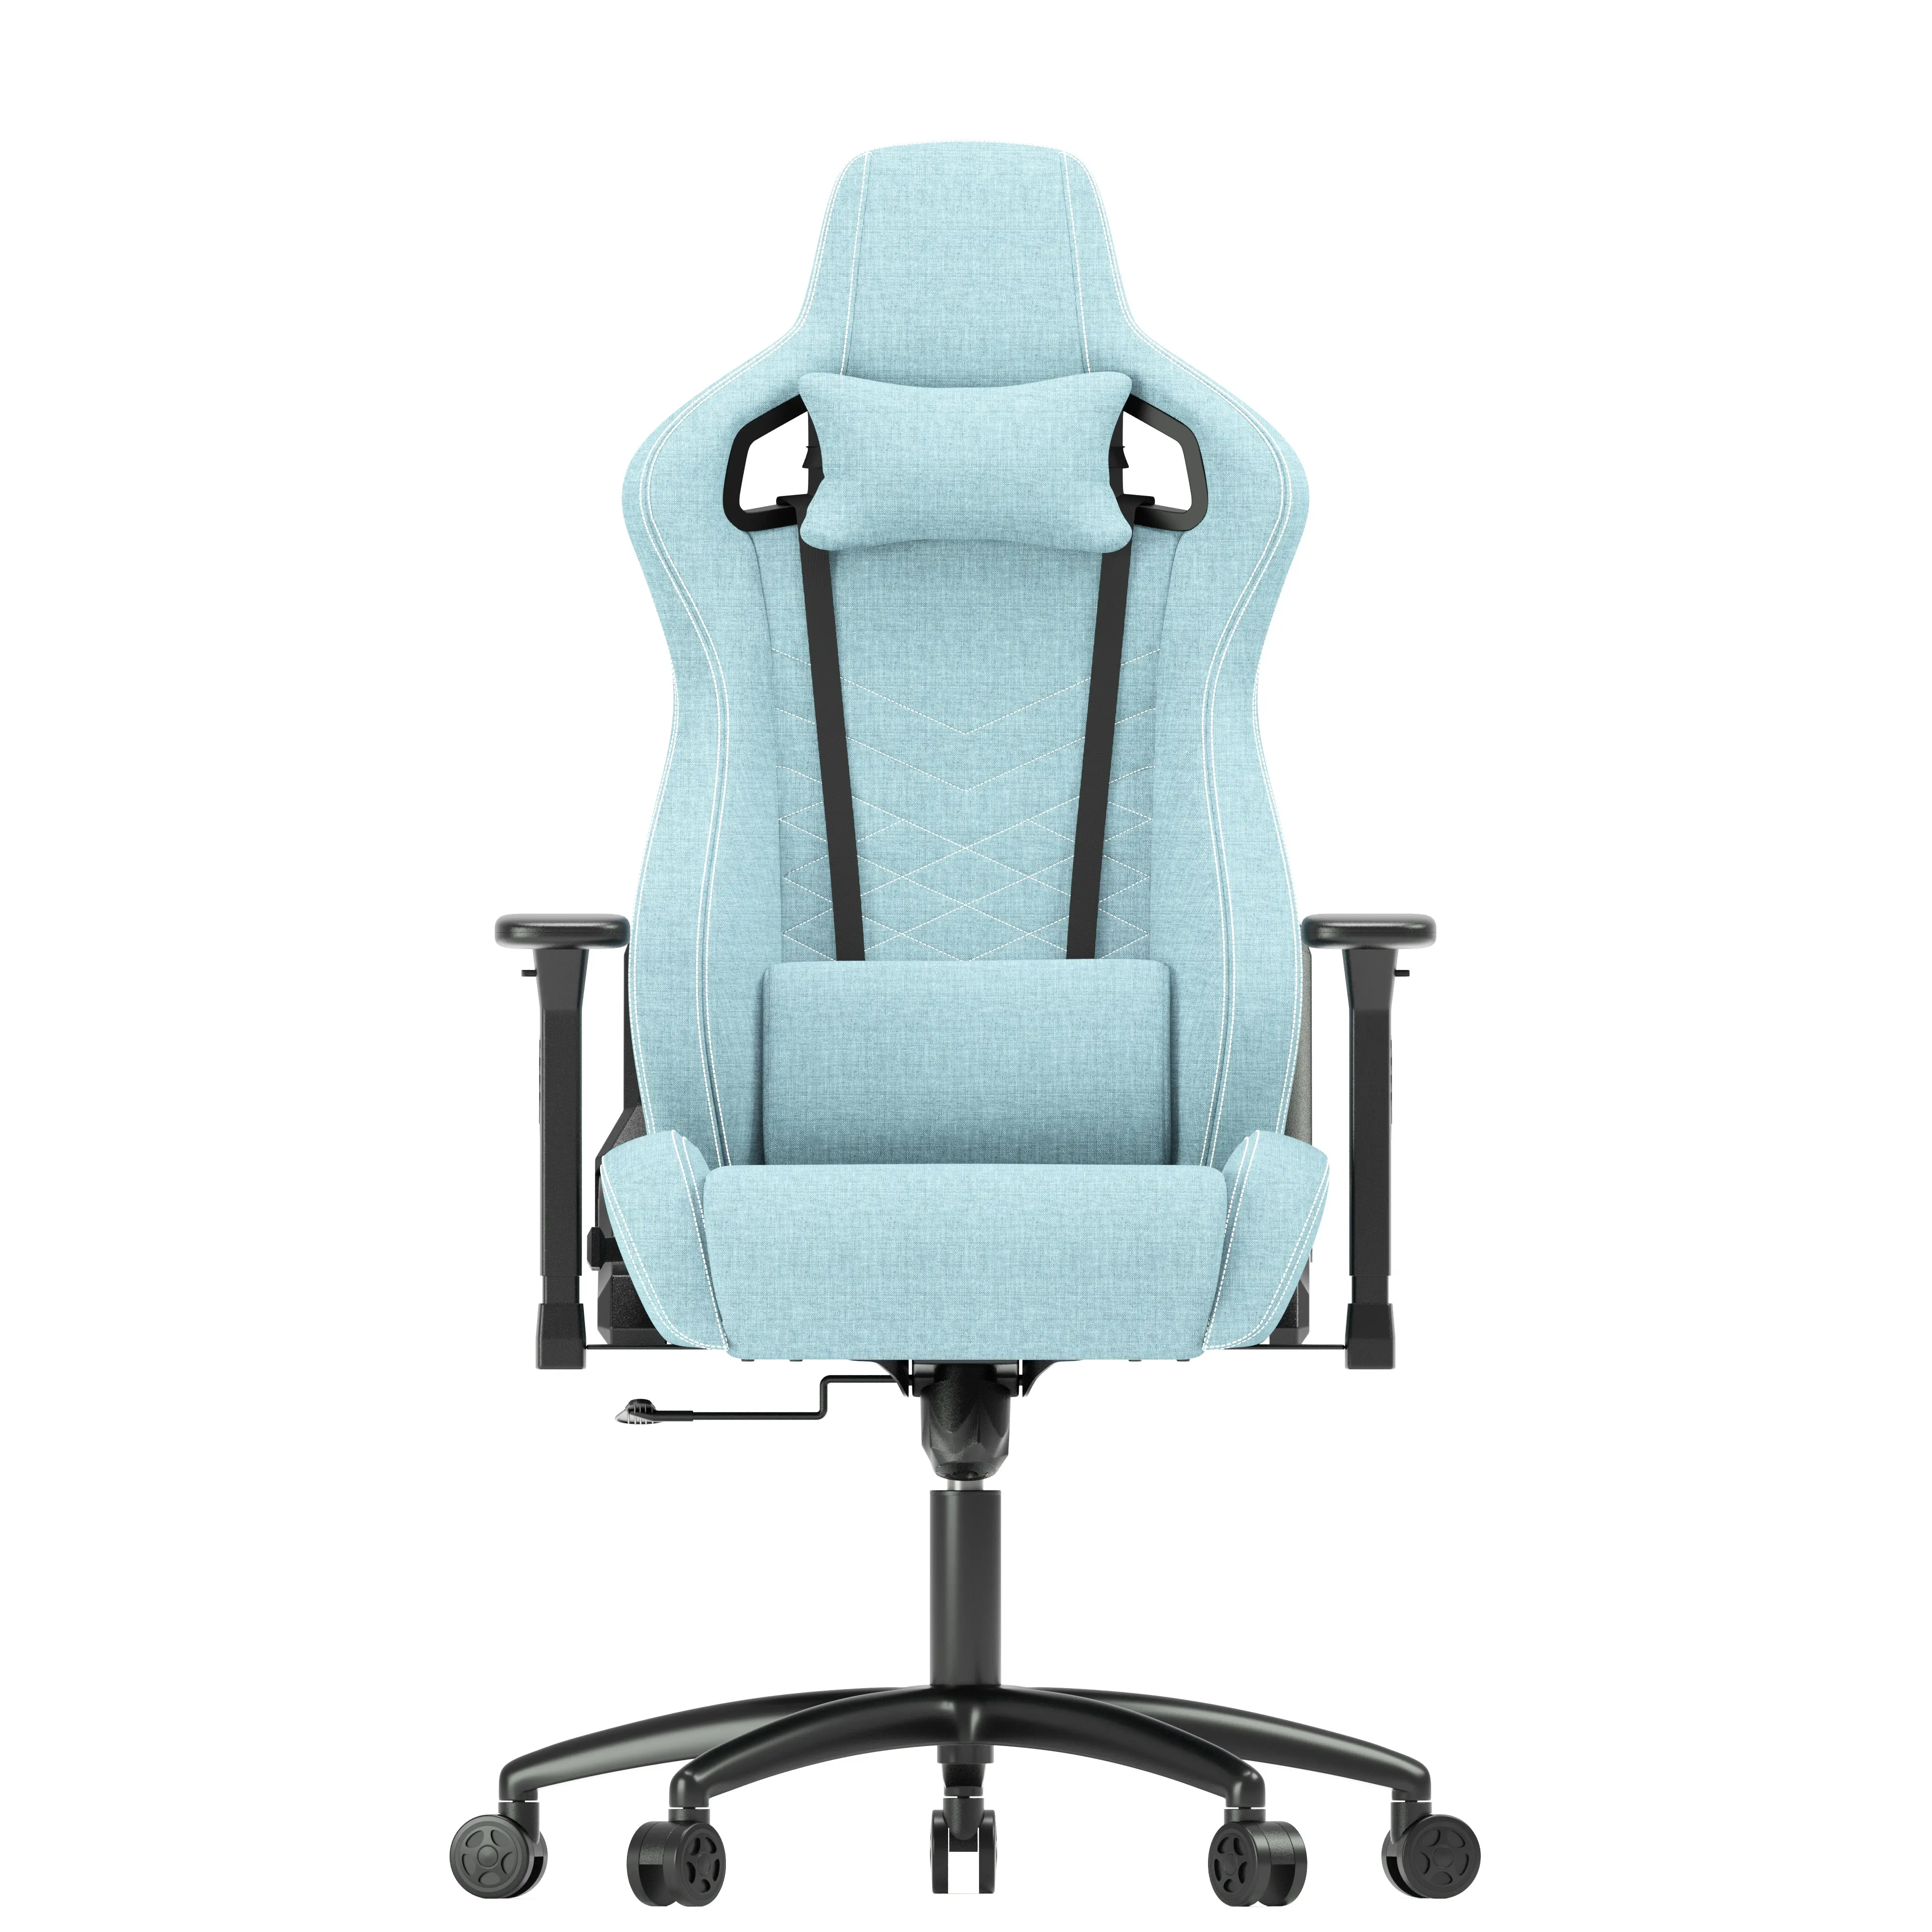 ONERAY Computer Laptop Fabric Gaming Chair for Esport Gamer style office with butterfly chassis for lady beauty